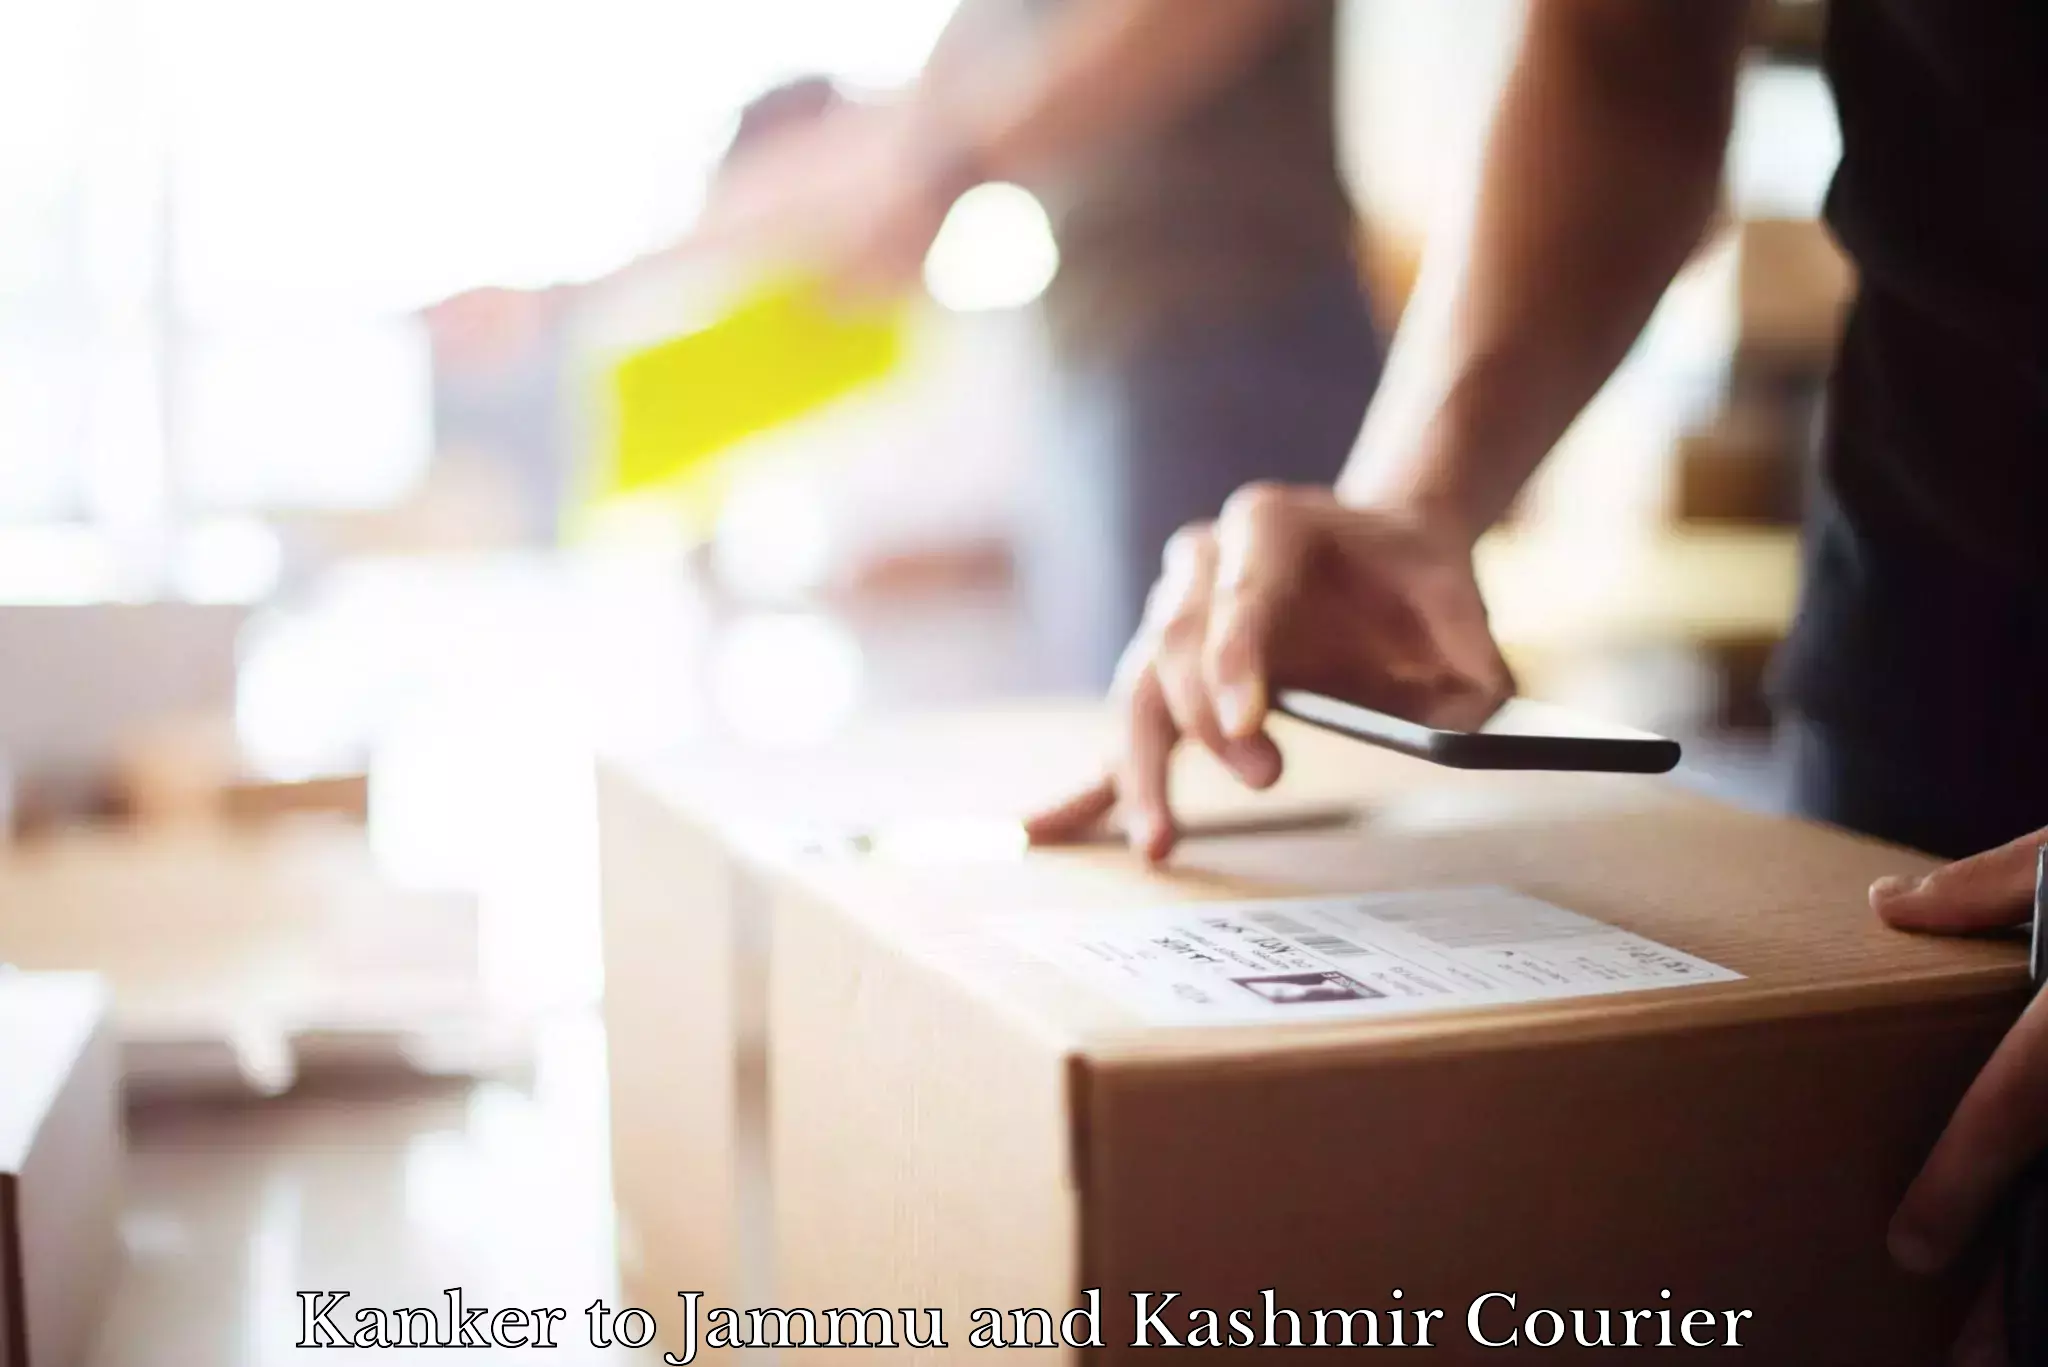 State-of-the-art courier technology Kanker to Rajouri